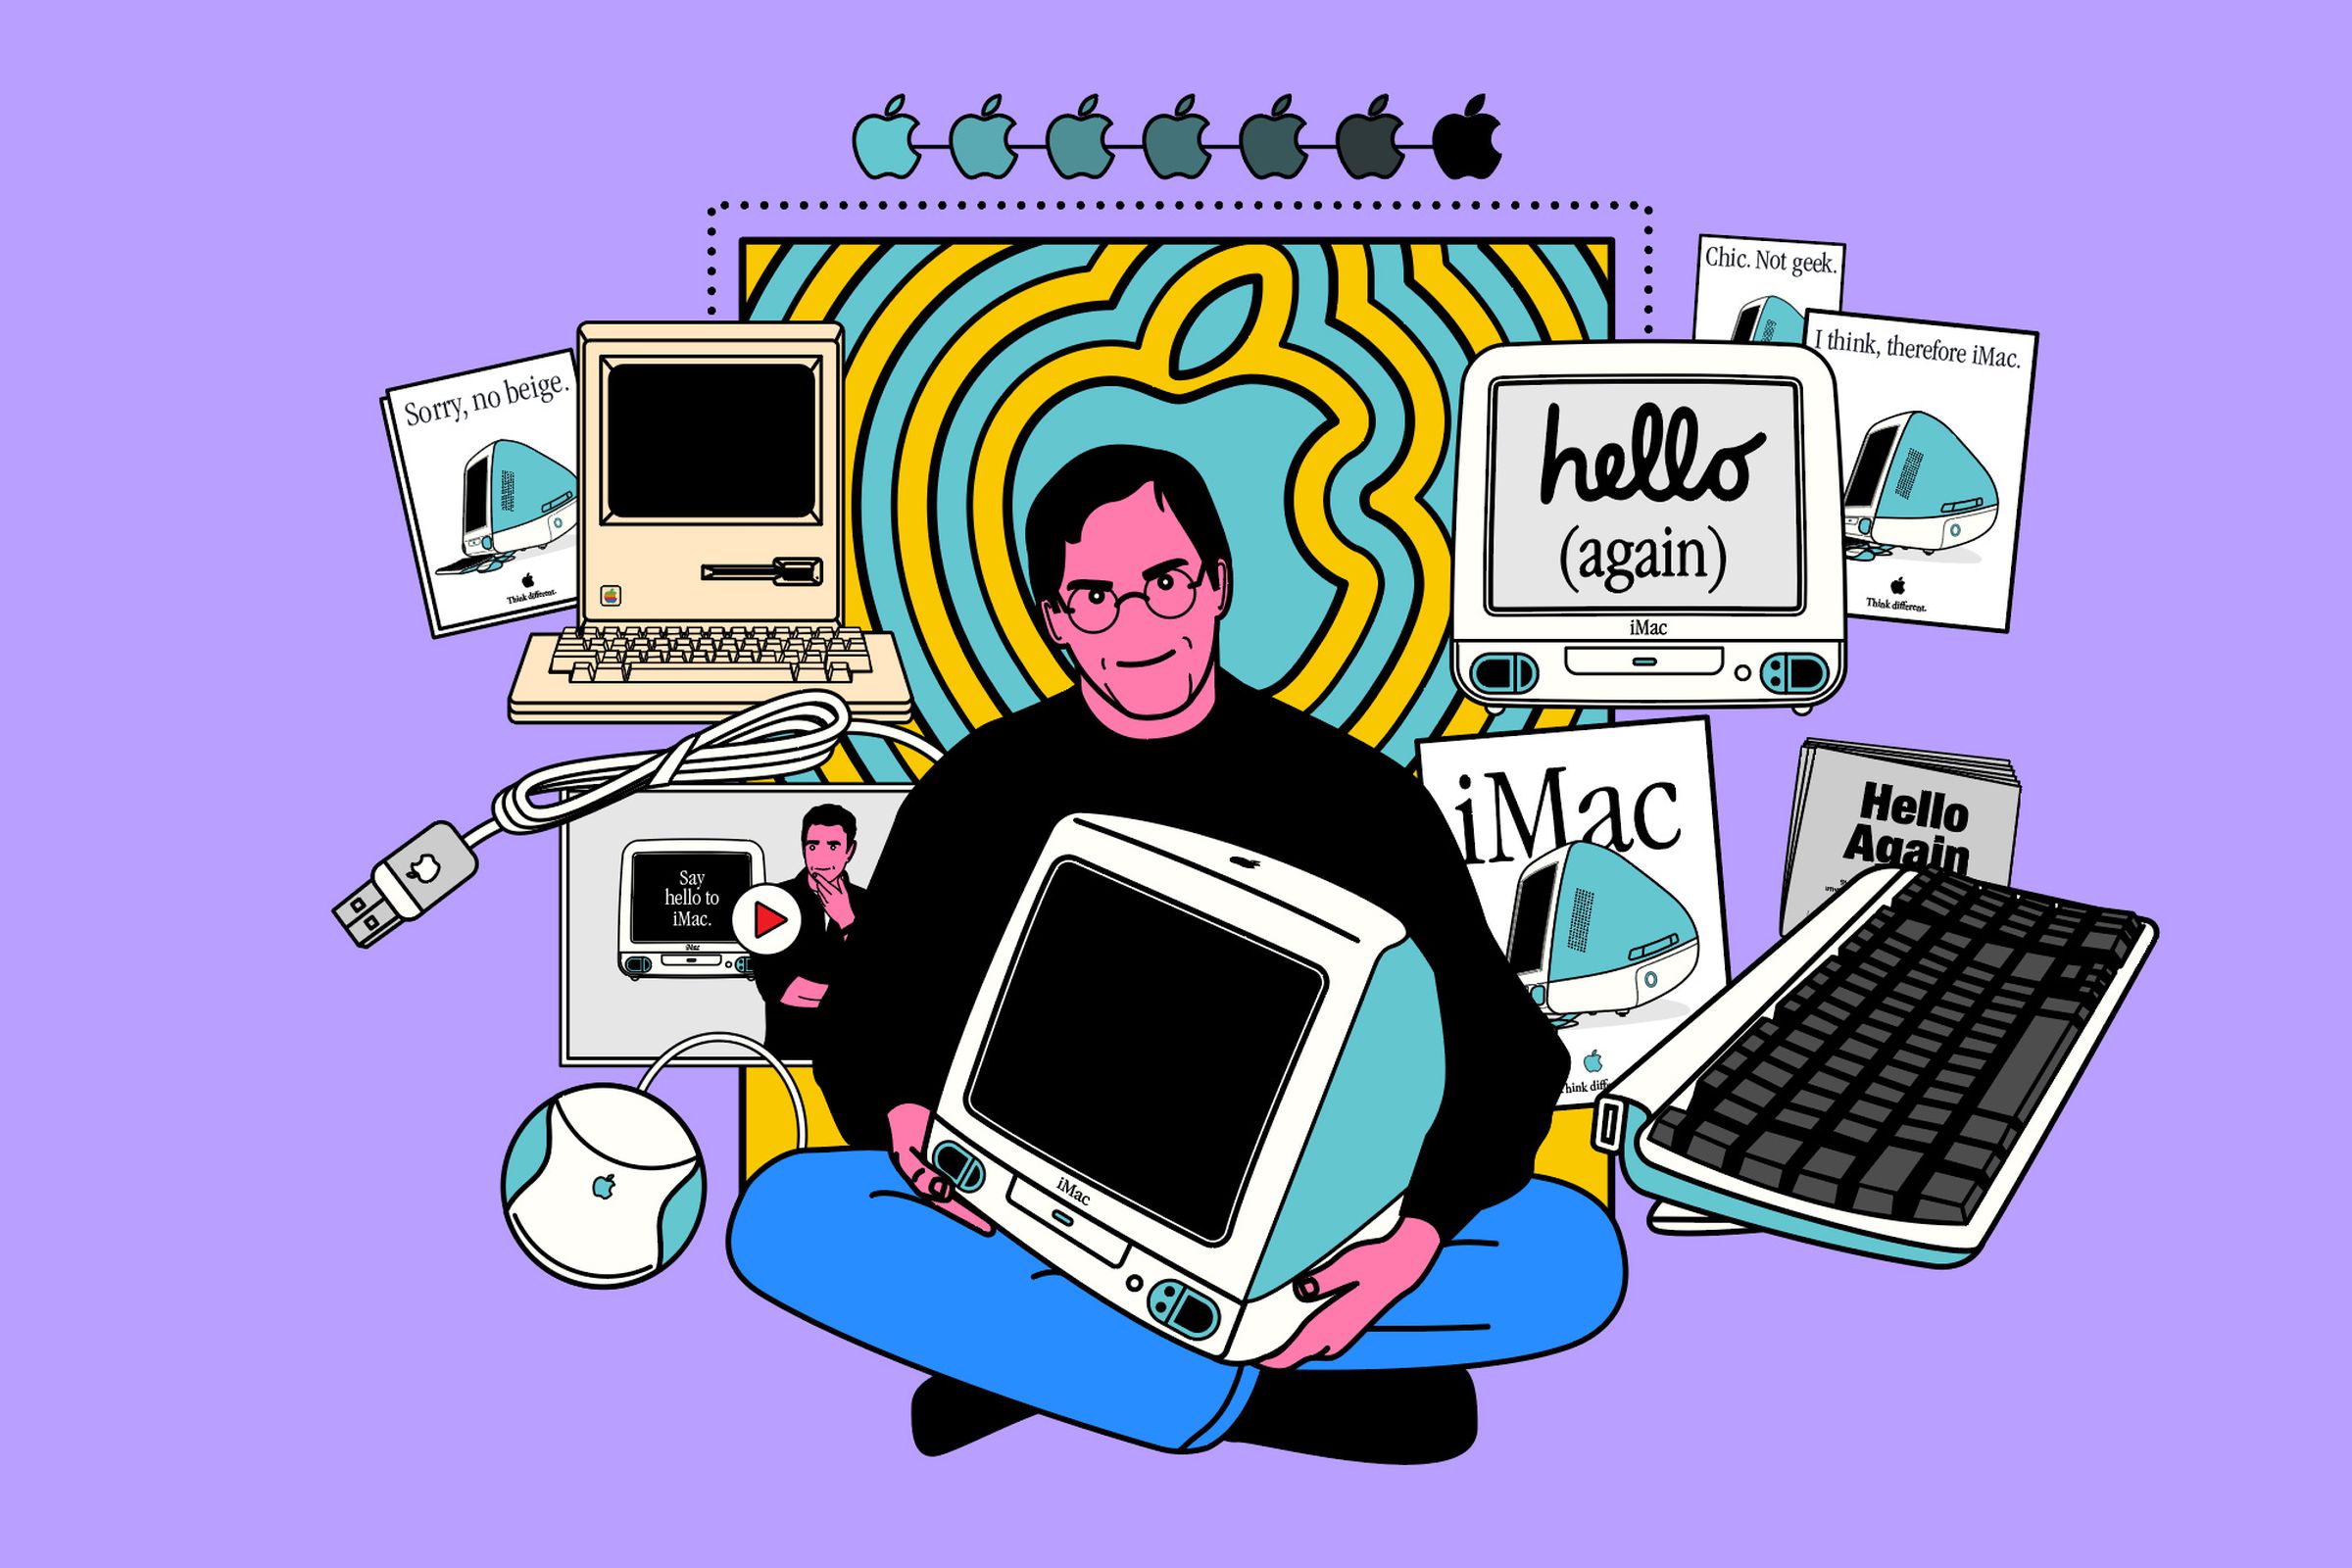 An illustration of Steve Jobs holding an iMac G3 with other vintage Apple products surrounding him on a light purple background.